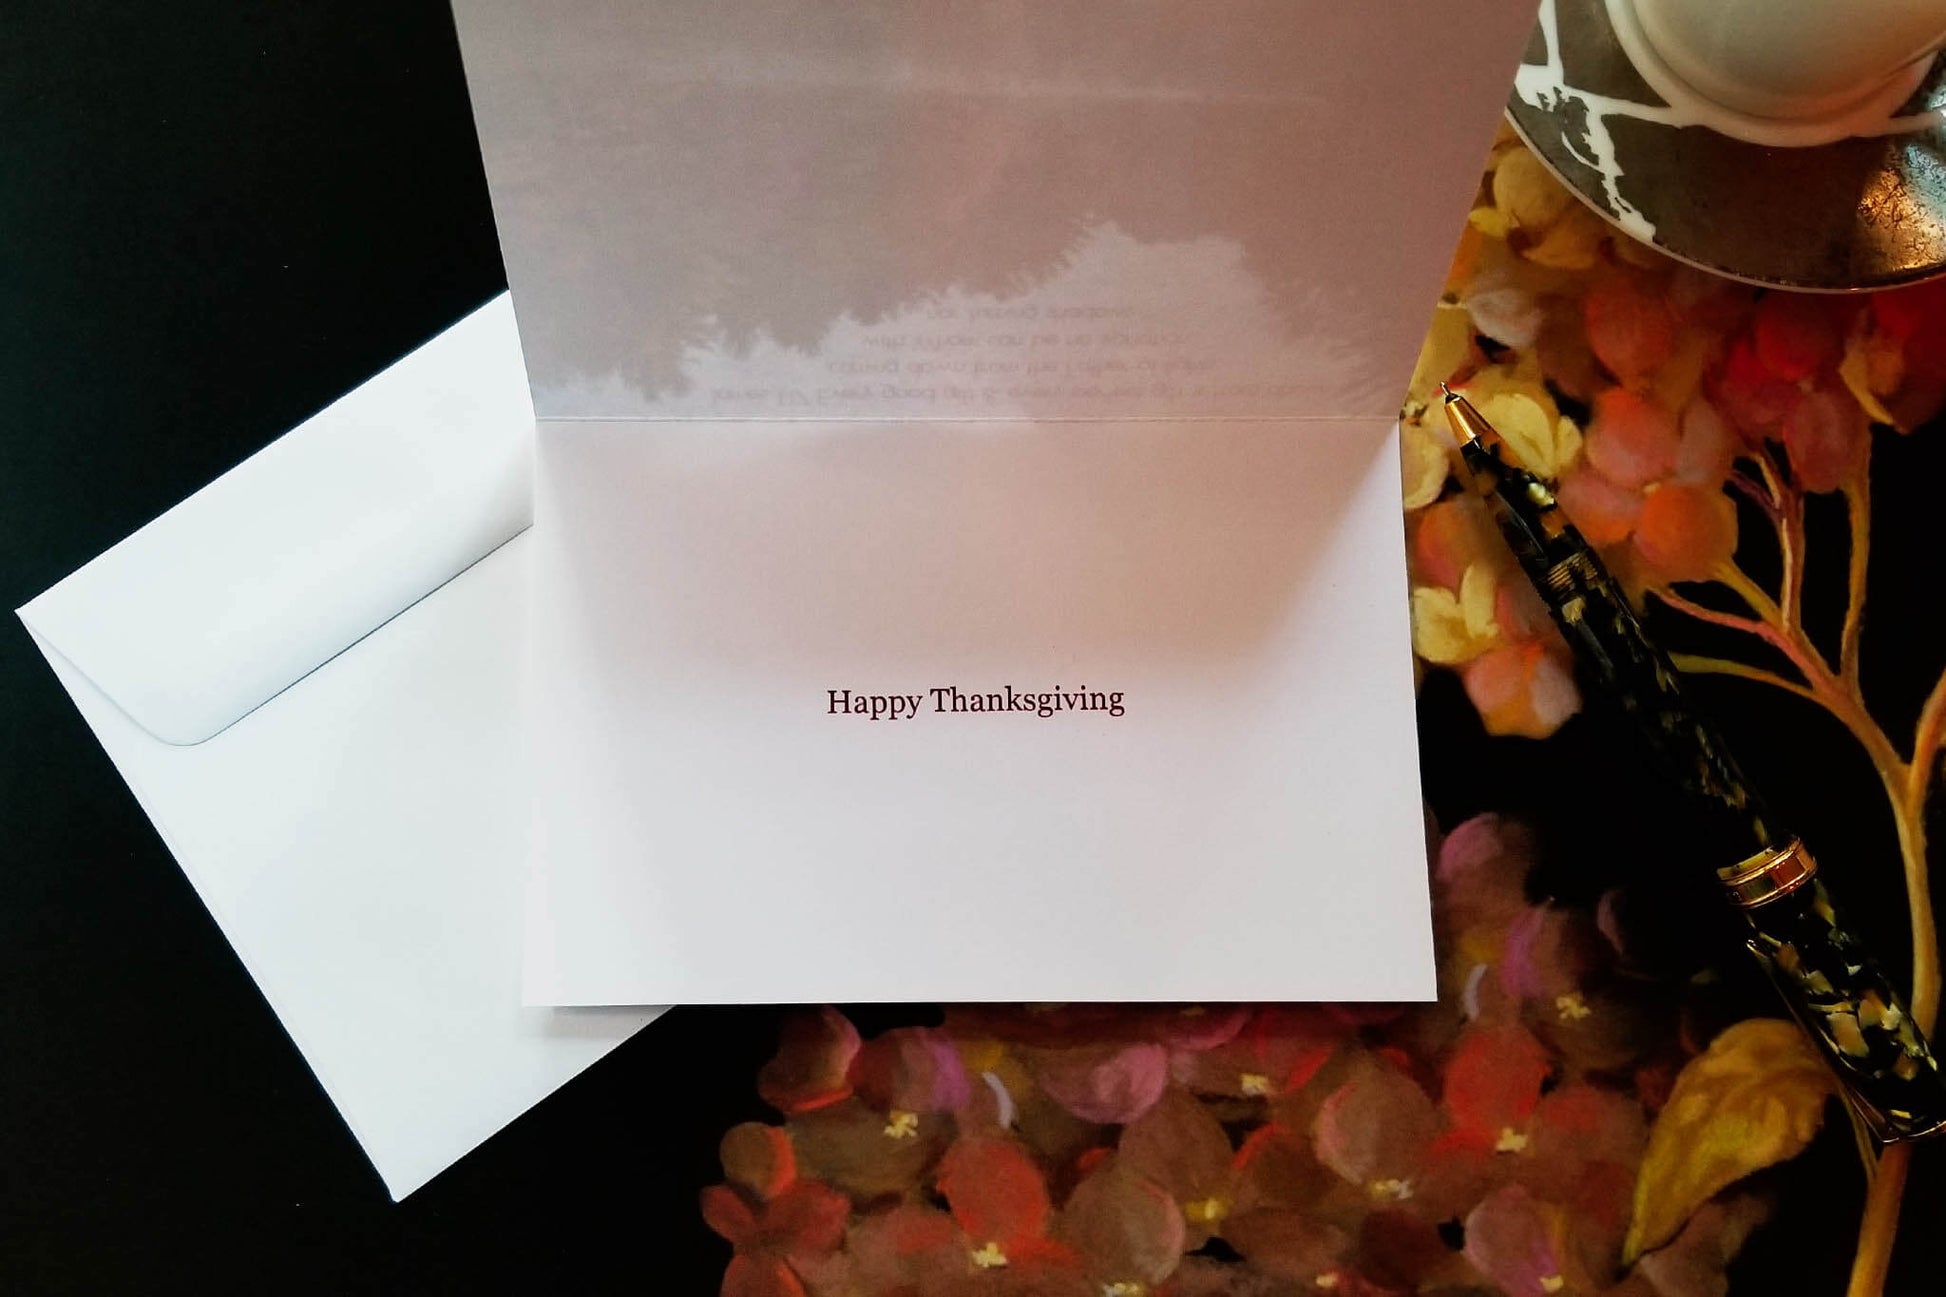 James 1:17 FW Christian greeting card with Happy Thanksgiving inside